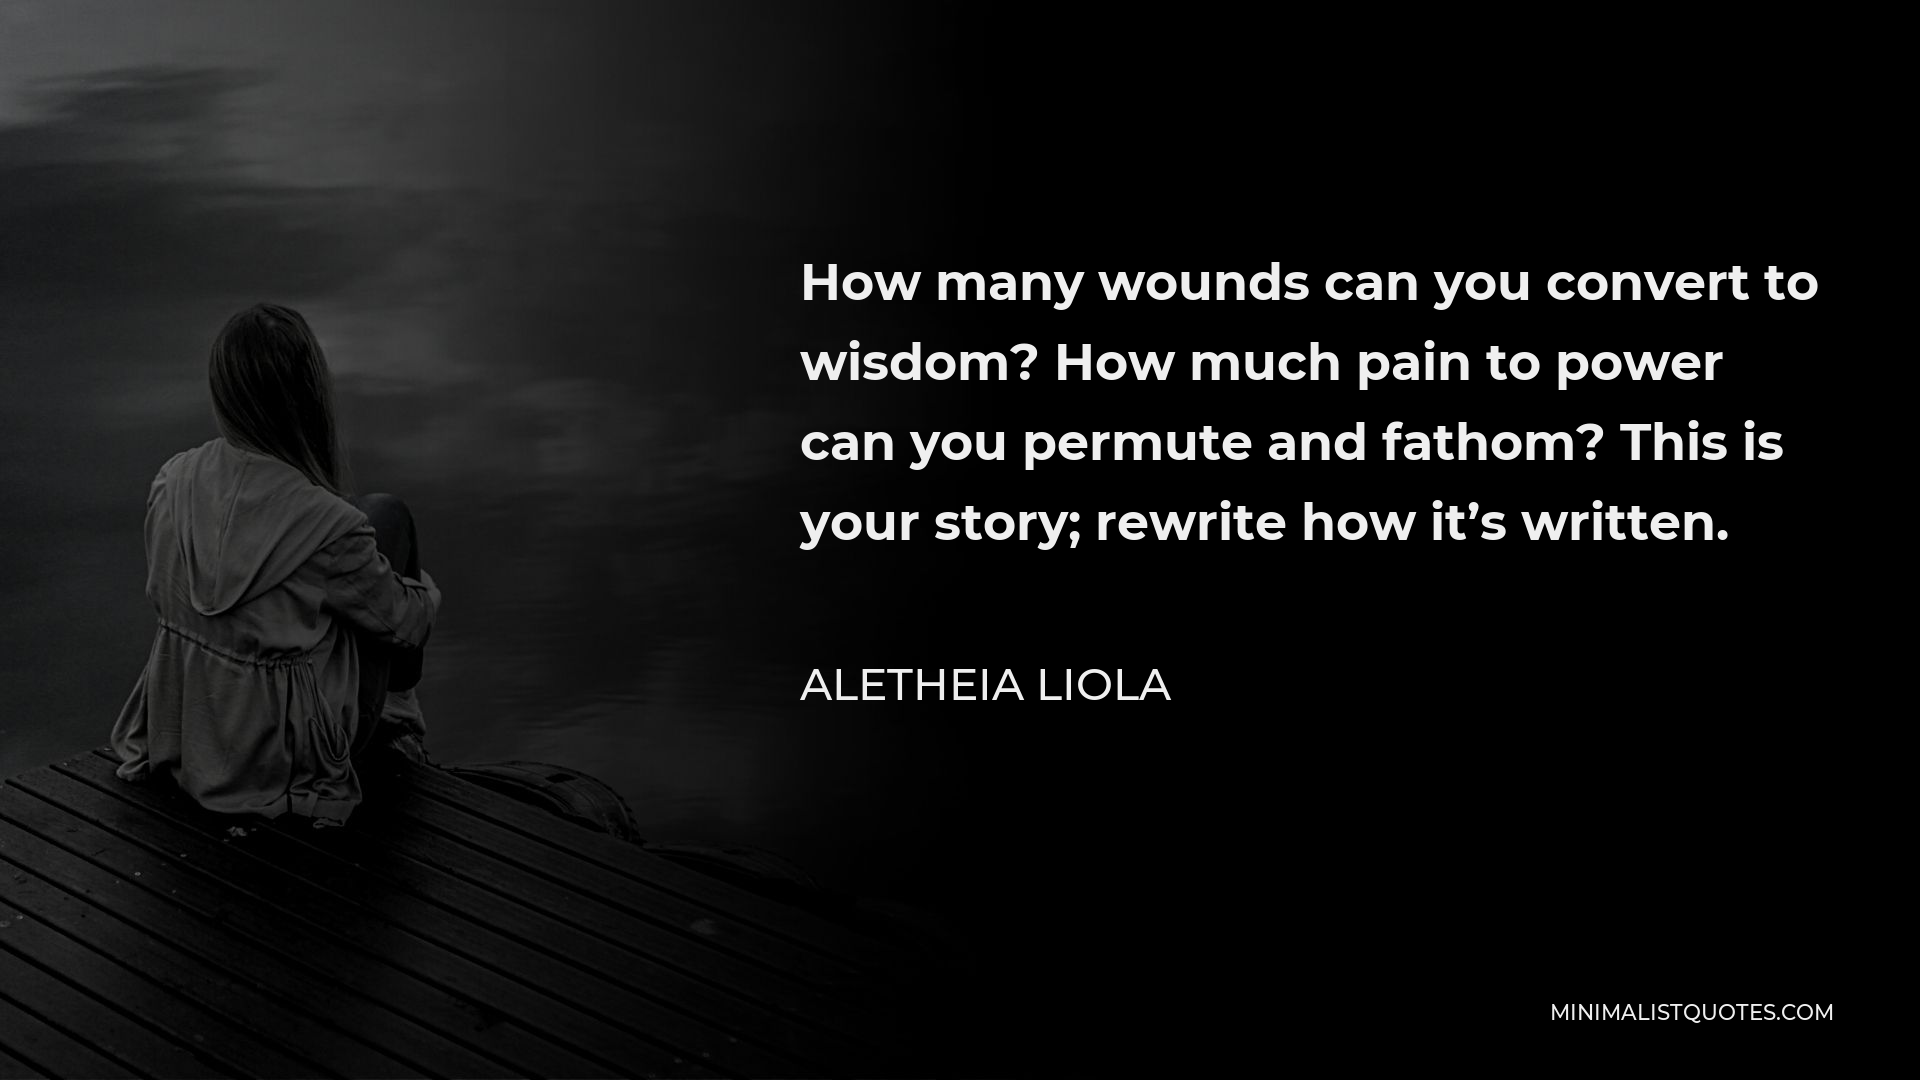 Aletheia Liola Quote - How many wounds can you convert to wisdom? How much pain to power can you permute and fathom? This is your story; rewrite how it’s written.